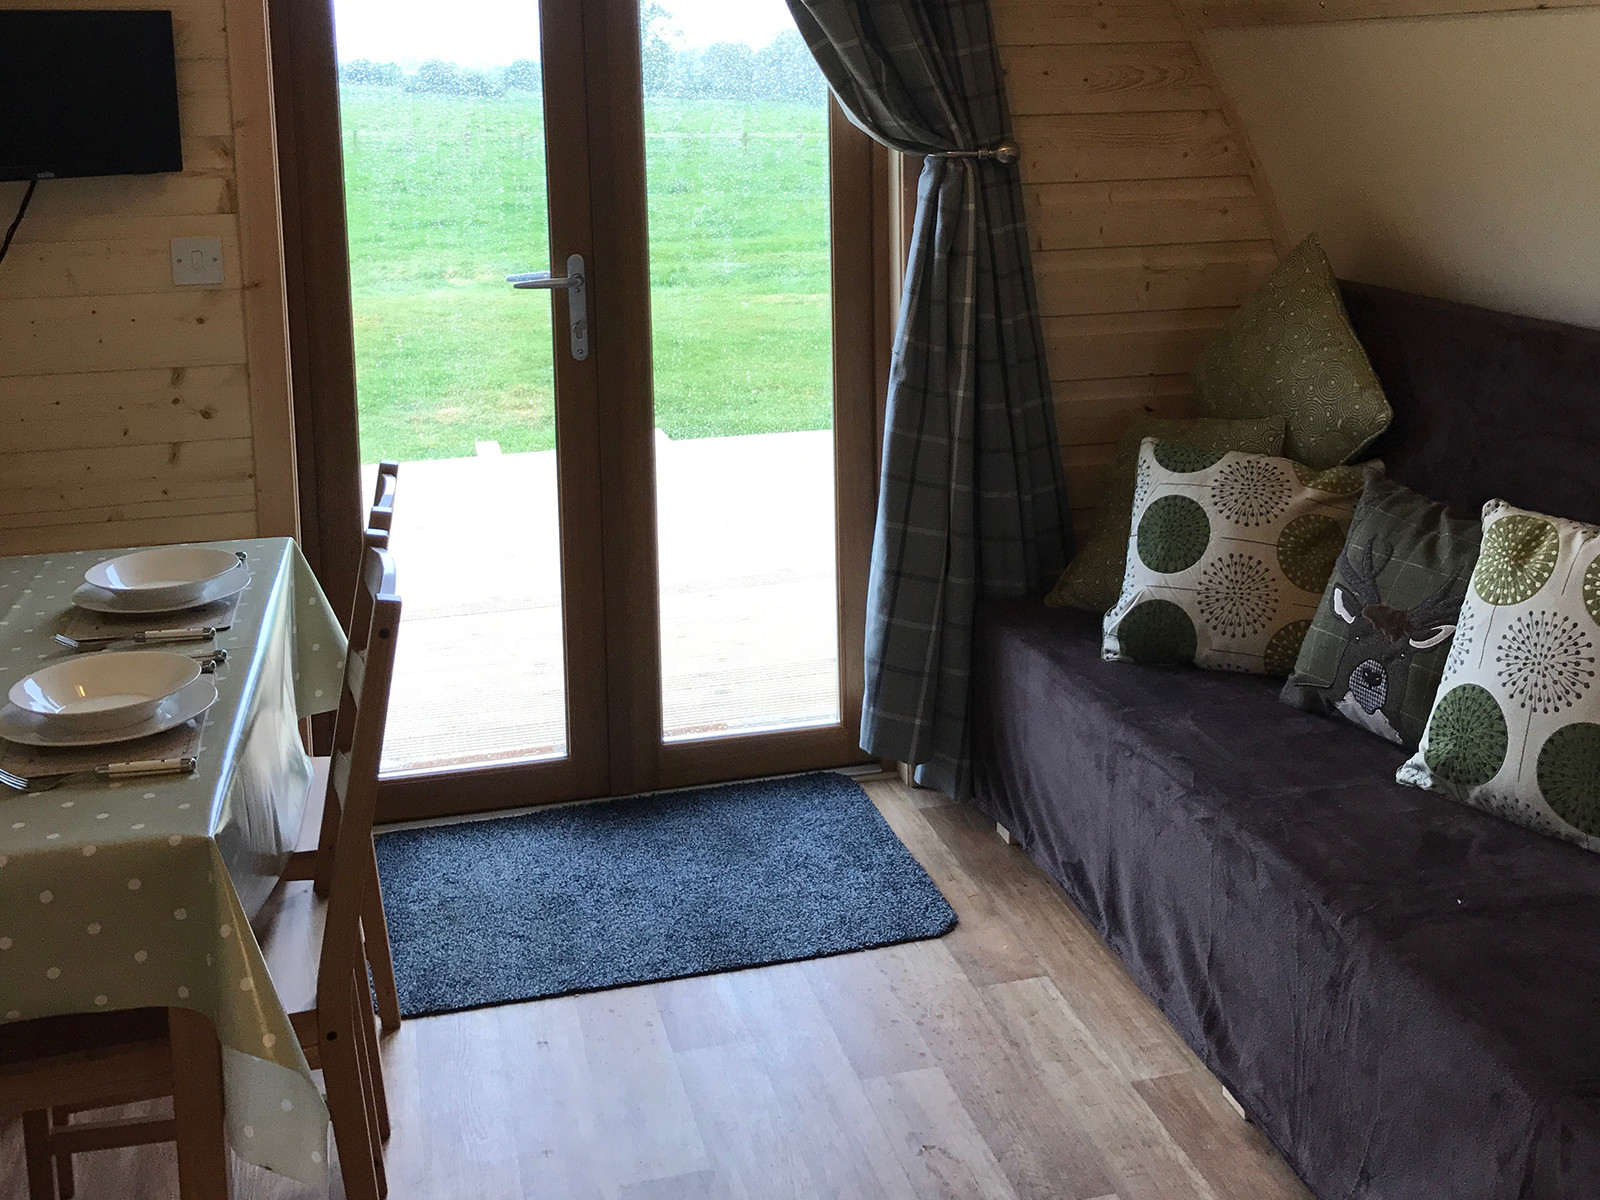 Indoor heating in all luxury glamping pods at Evenlode Grounds Farm